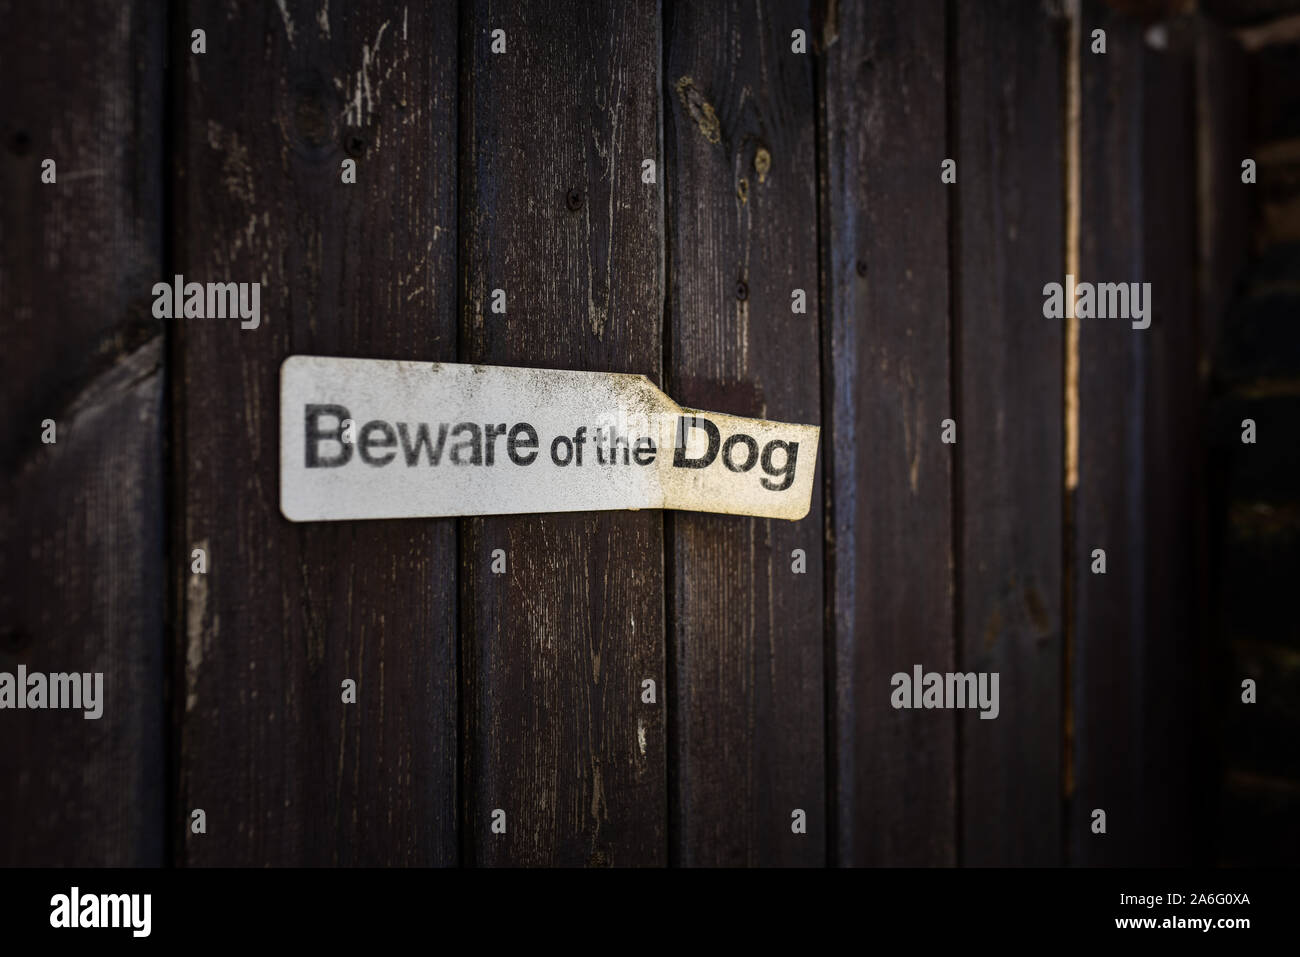 Beware of dog sign in disrepair nearly falling off the wooden fence, guard dog alert Stock Photo